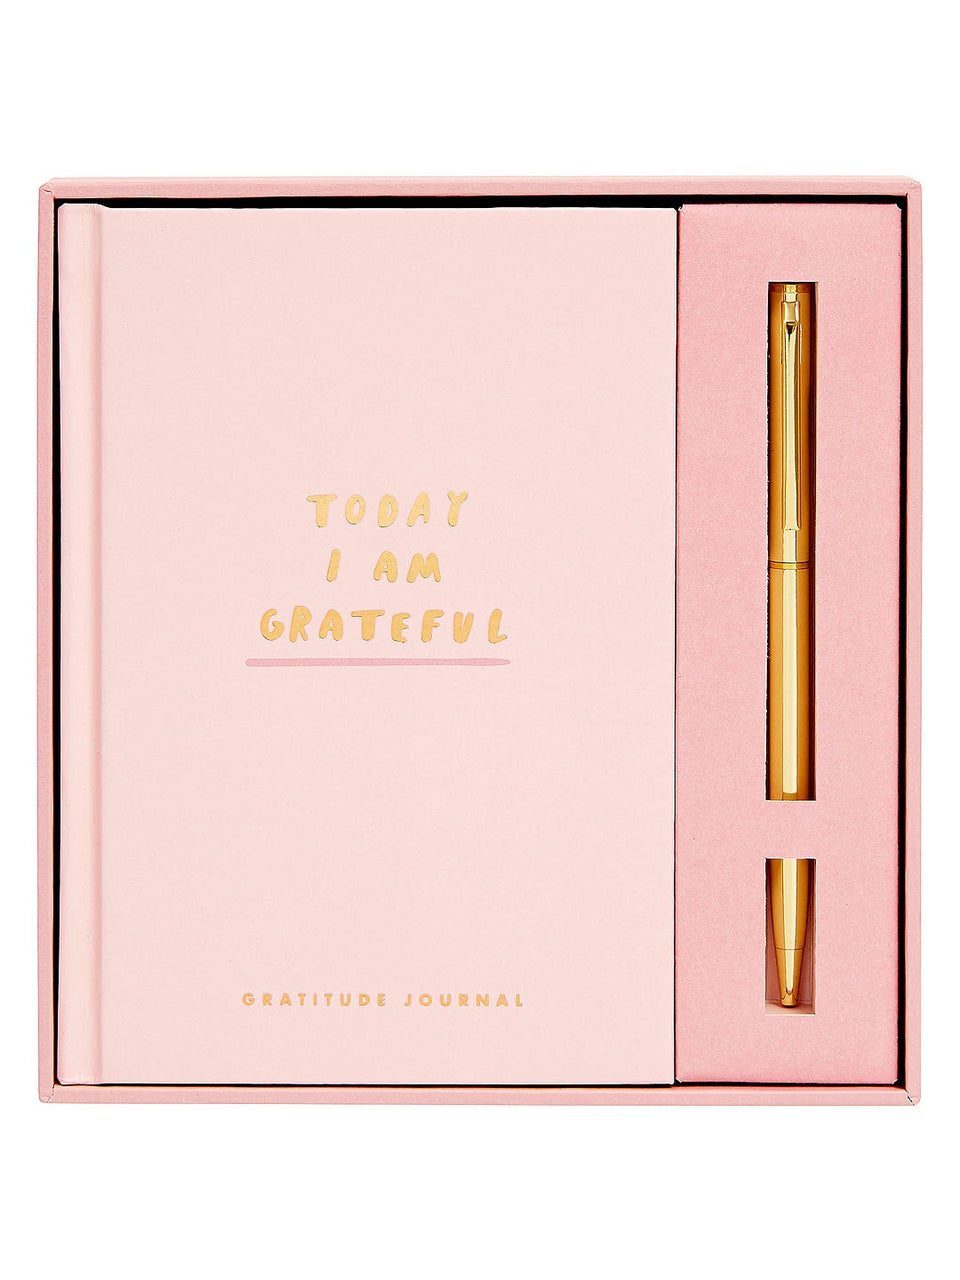 Gratitude Journal With Pen: Your Story